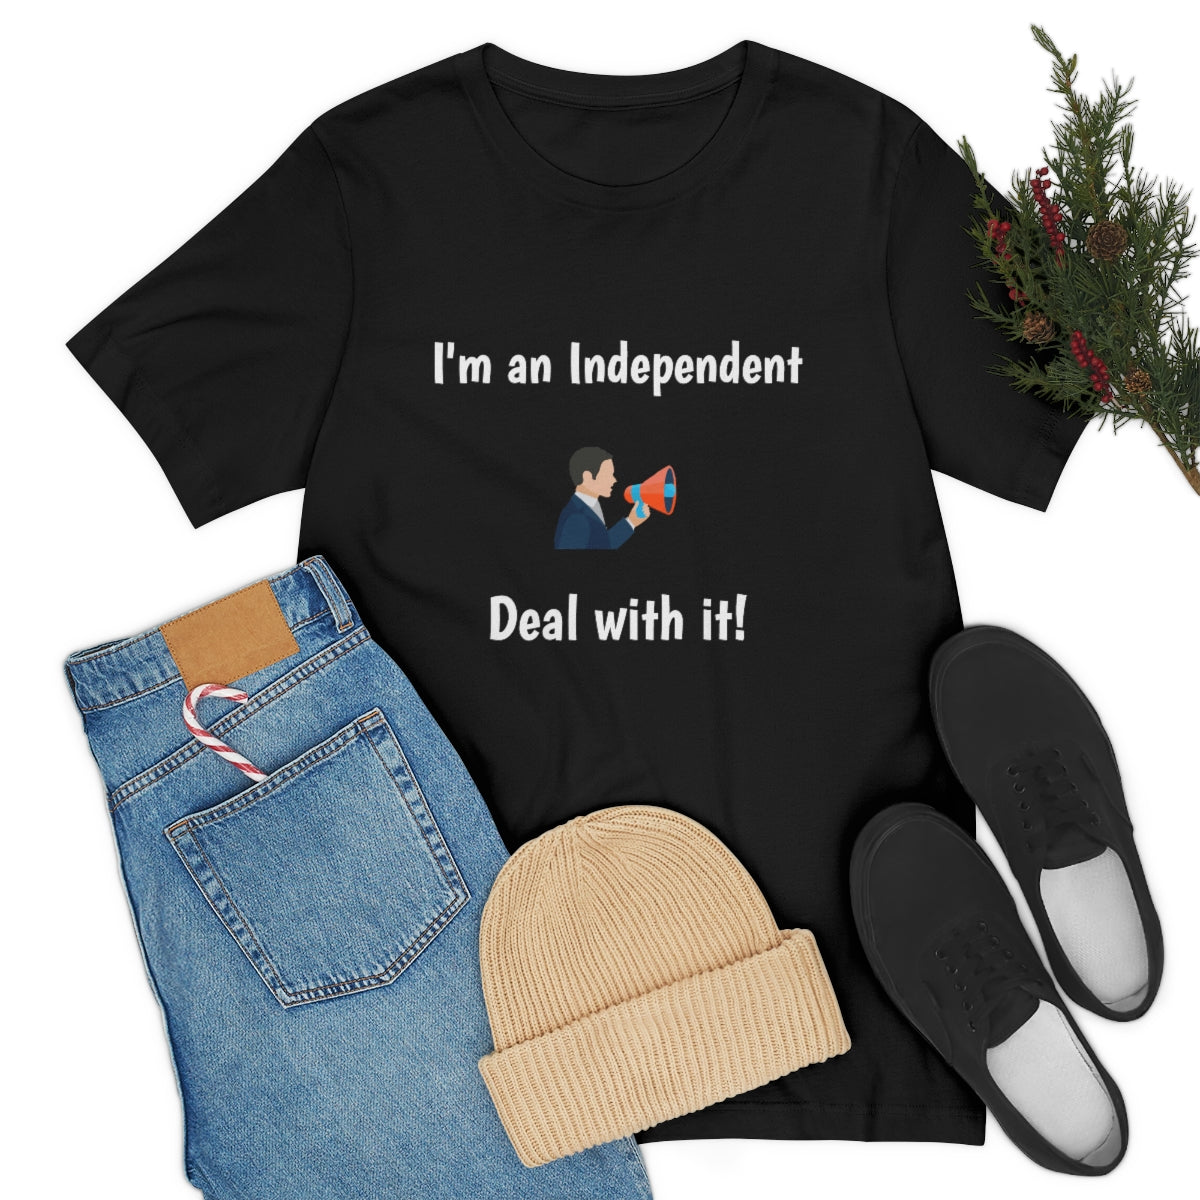 I'm an Independent, deal with it - Funny - Unisex Short Sleeve Tee